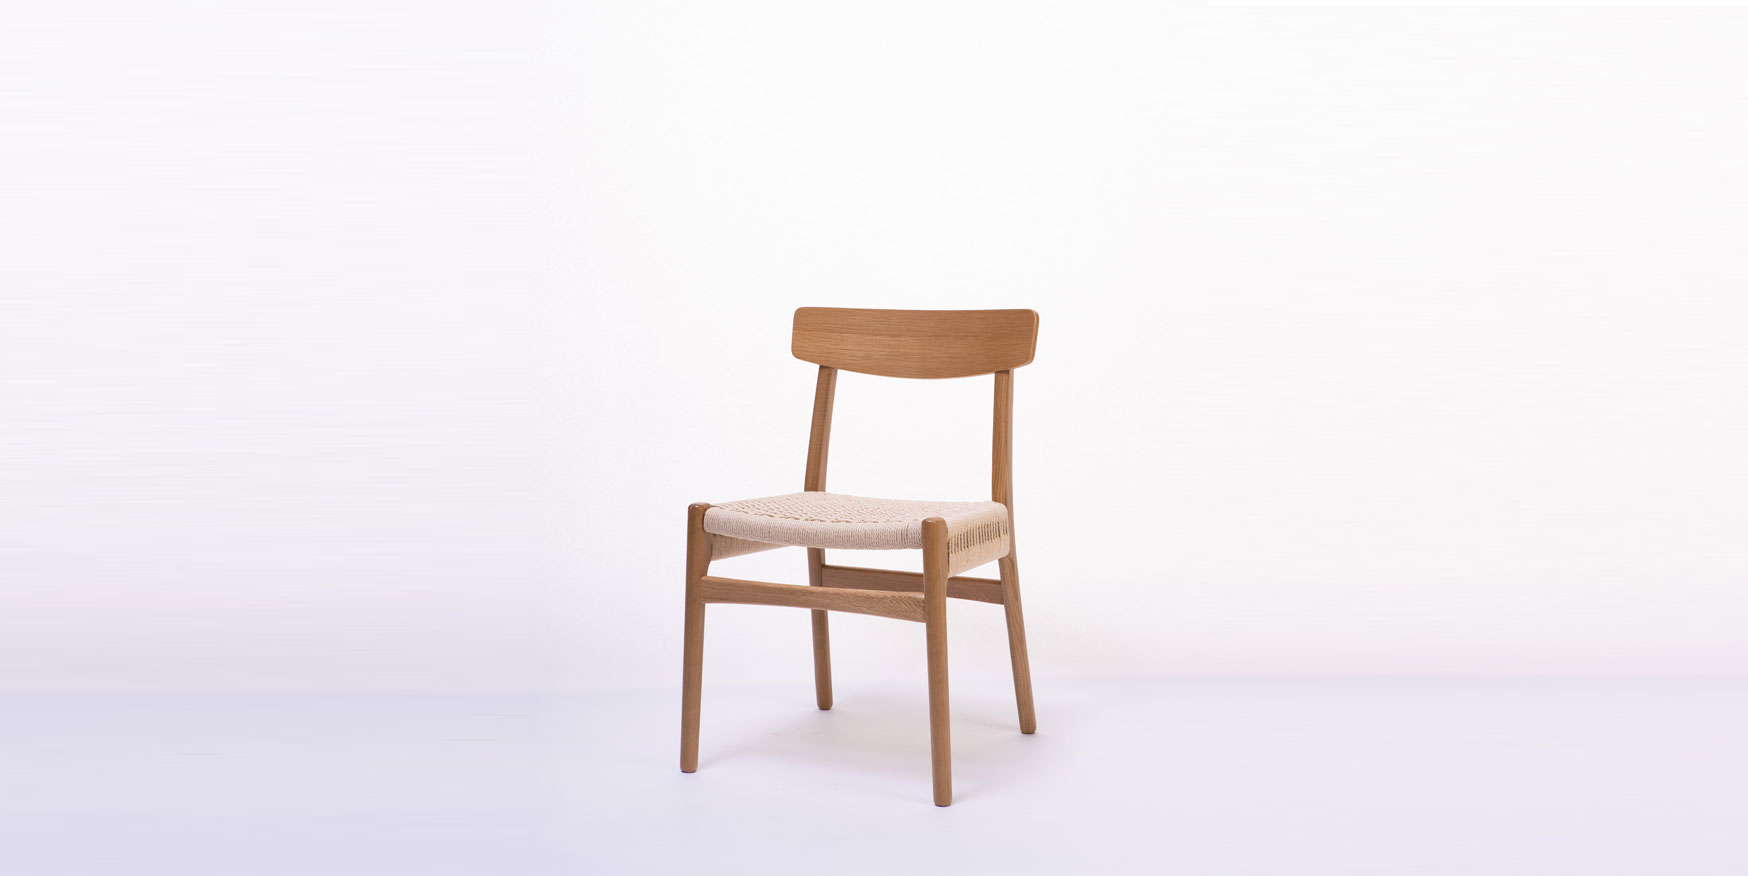 replica bentwood dining chairs
